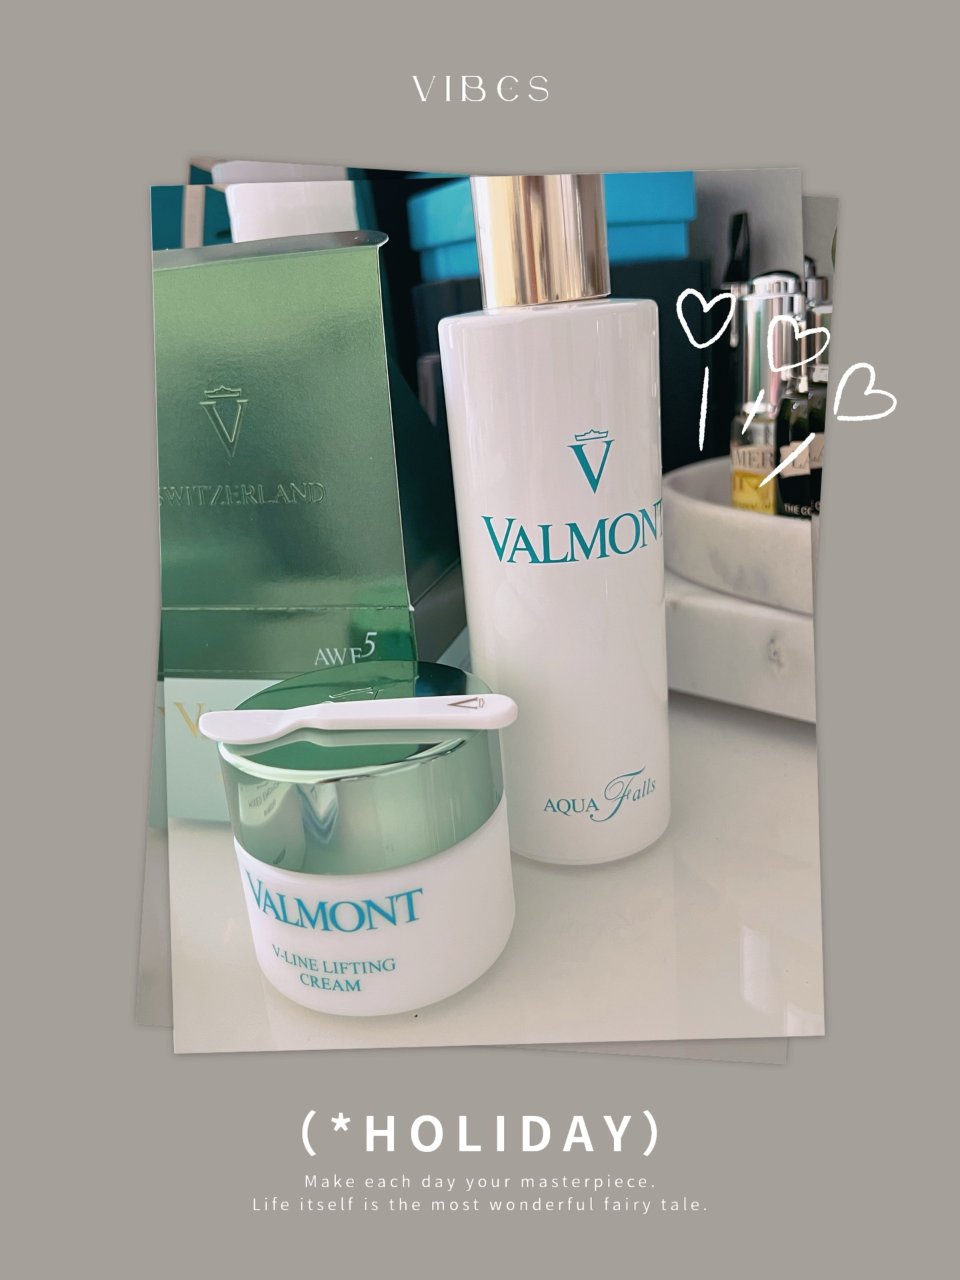 La Maison Valmont | Cosmetic care and beauty rituals